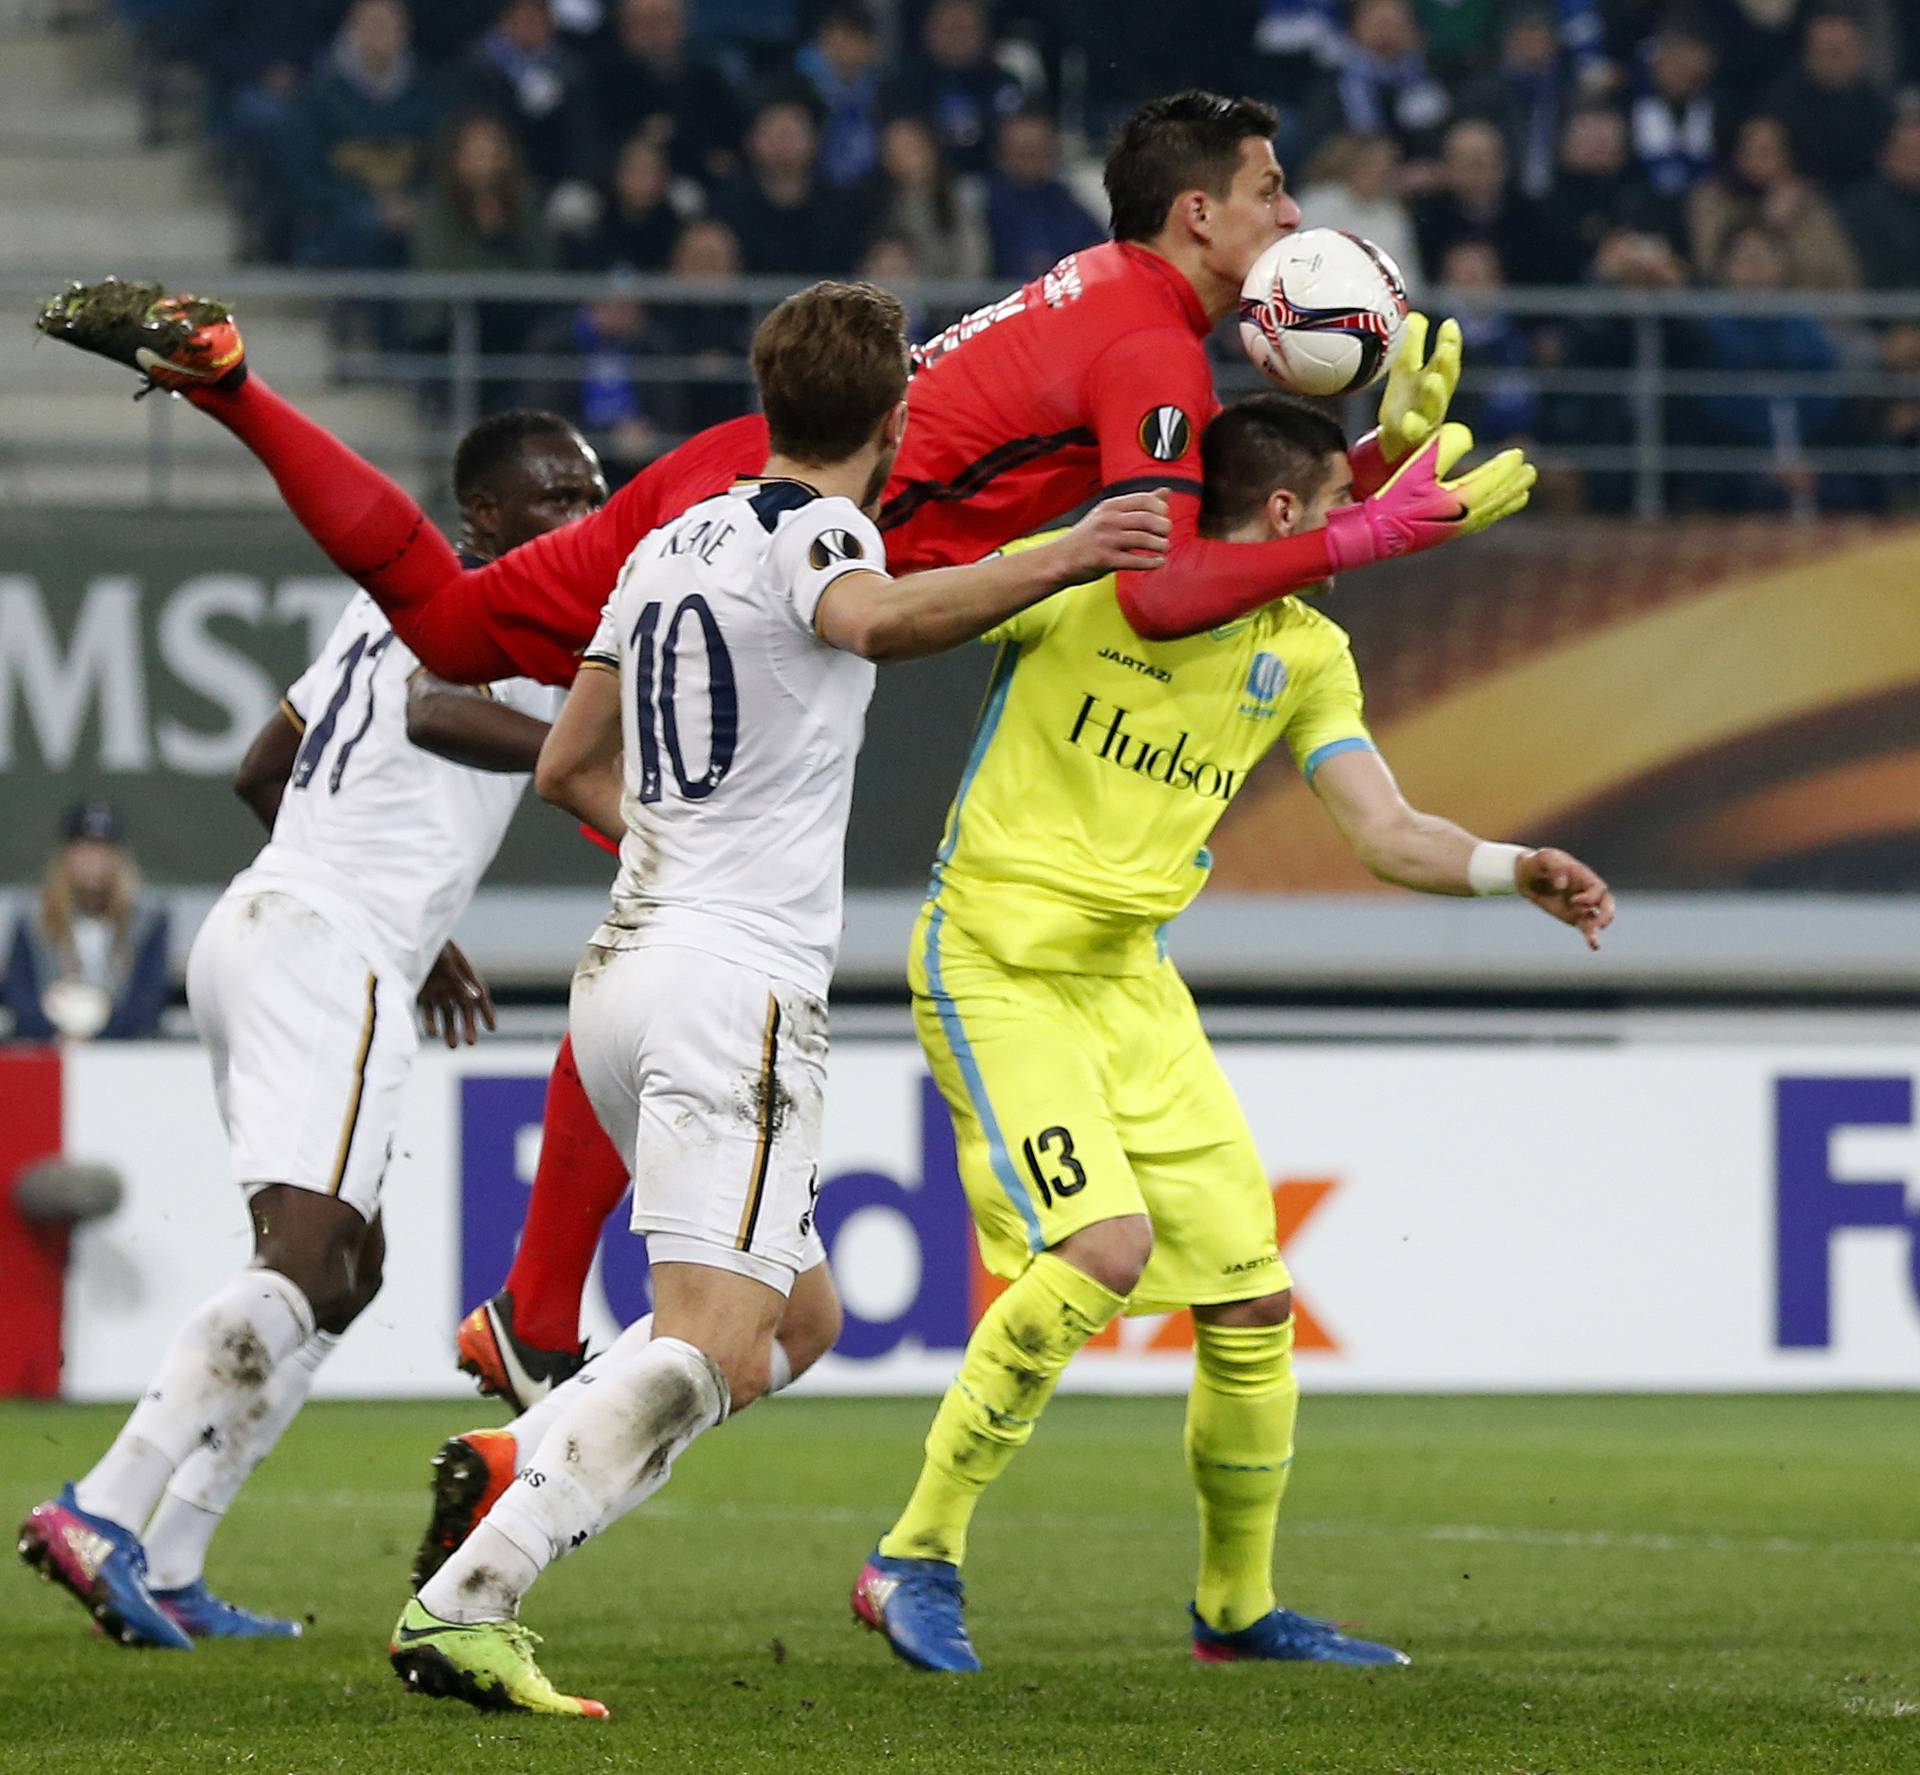 Gent's Lovre Kalinic gathers the ball